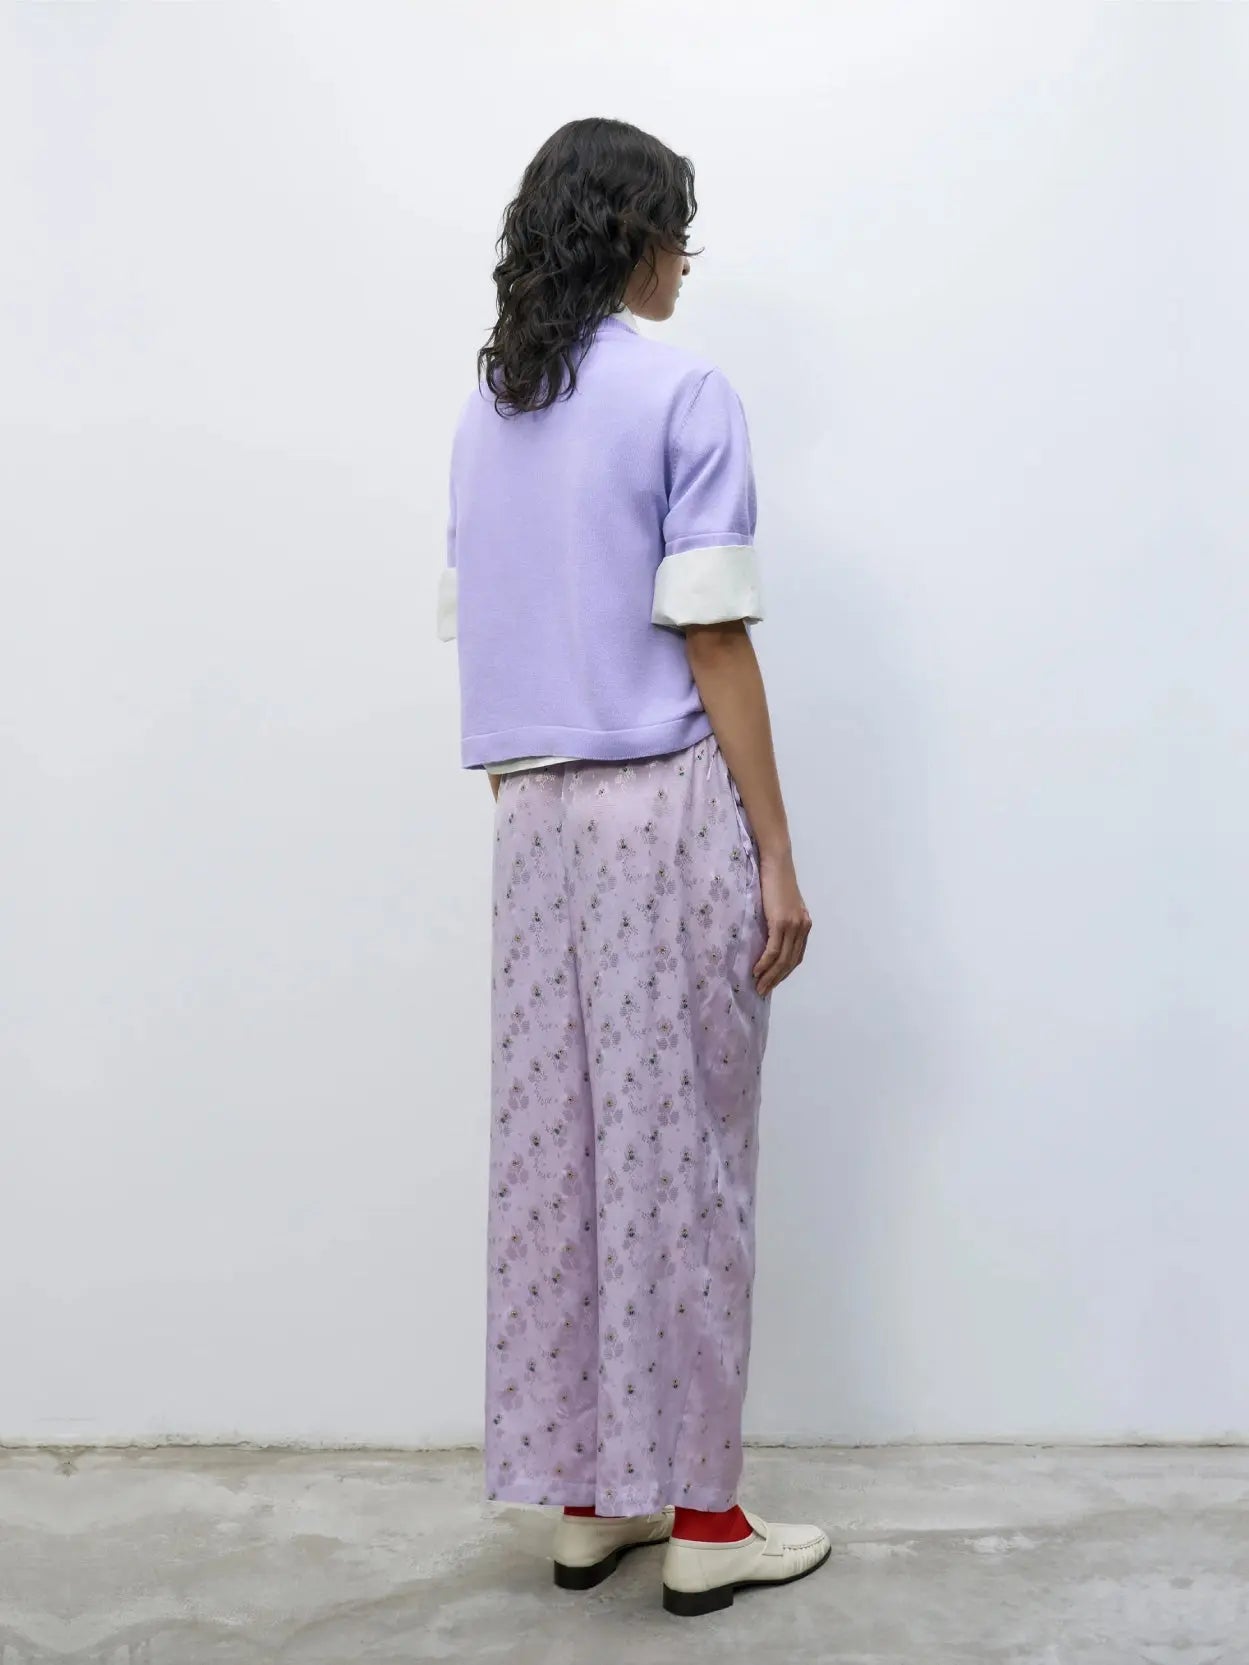 A person stands against a plain white background. They are dressed in a light purple, short-sleeve sweater over a white shirt, Silk Floral Pants Cardo from Cordera, white shoes, and red socks. A small crossbody bag from bassalstore in Barcelona is slung over their shoulder.